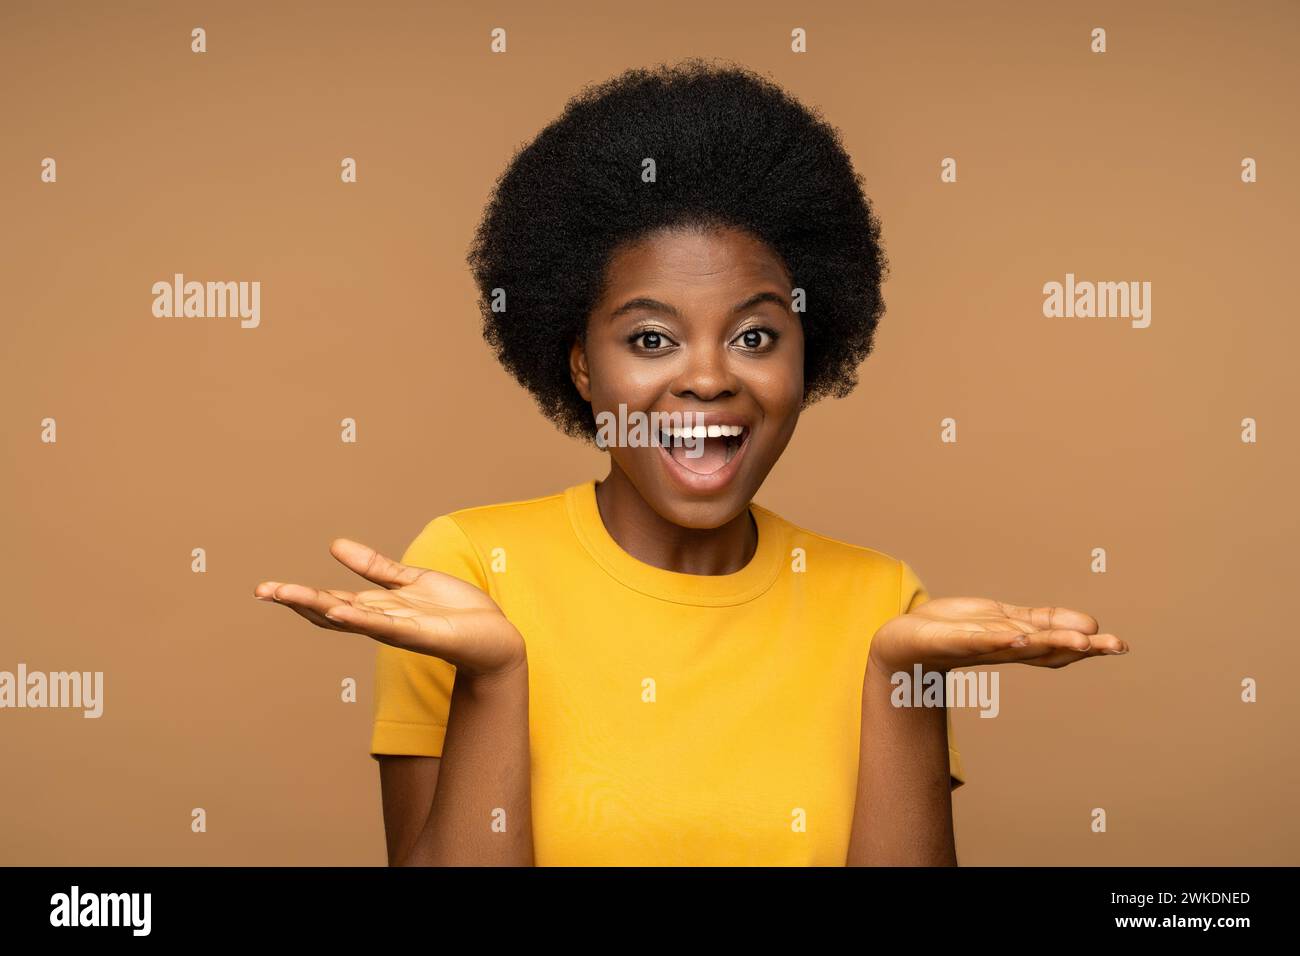 Merry charismatic africam american woman with happy face expression, smiling broadly, look at camera Stock Photo